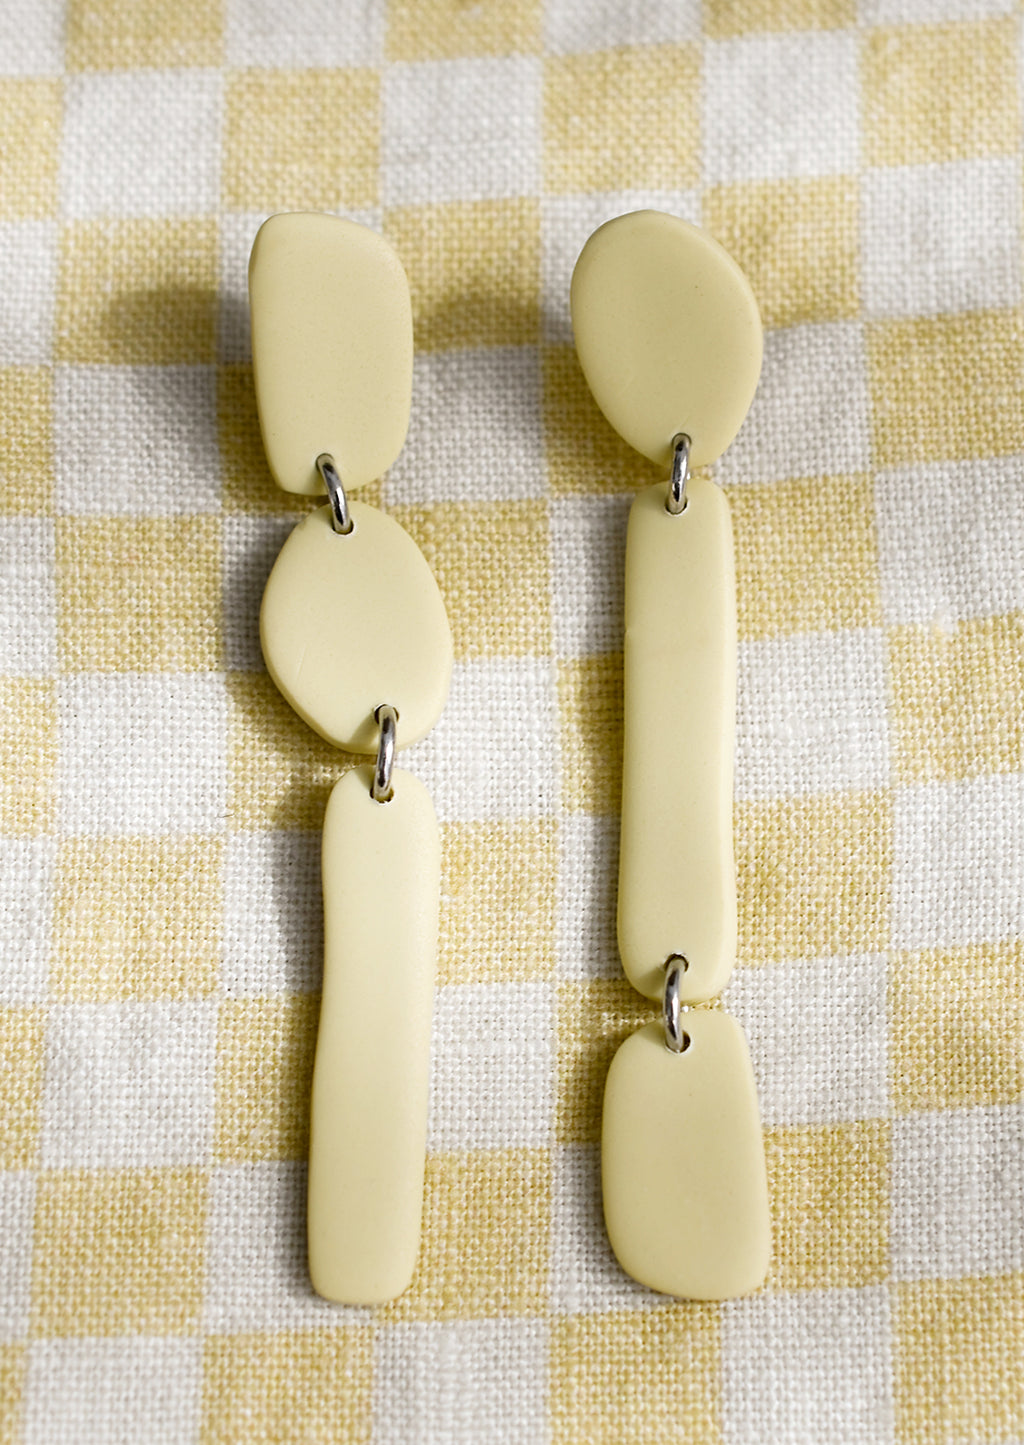 Butter Yellow: A pair of pale yellow clay earrings in post back drop silhouette.